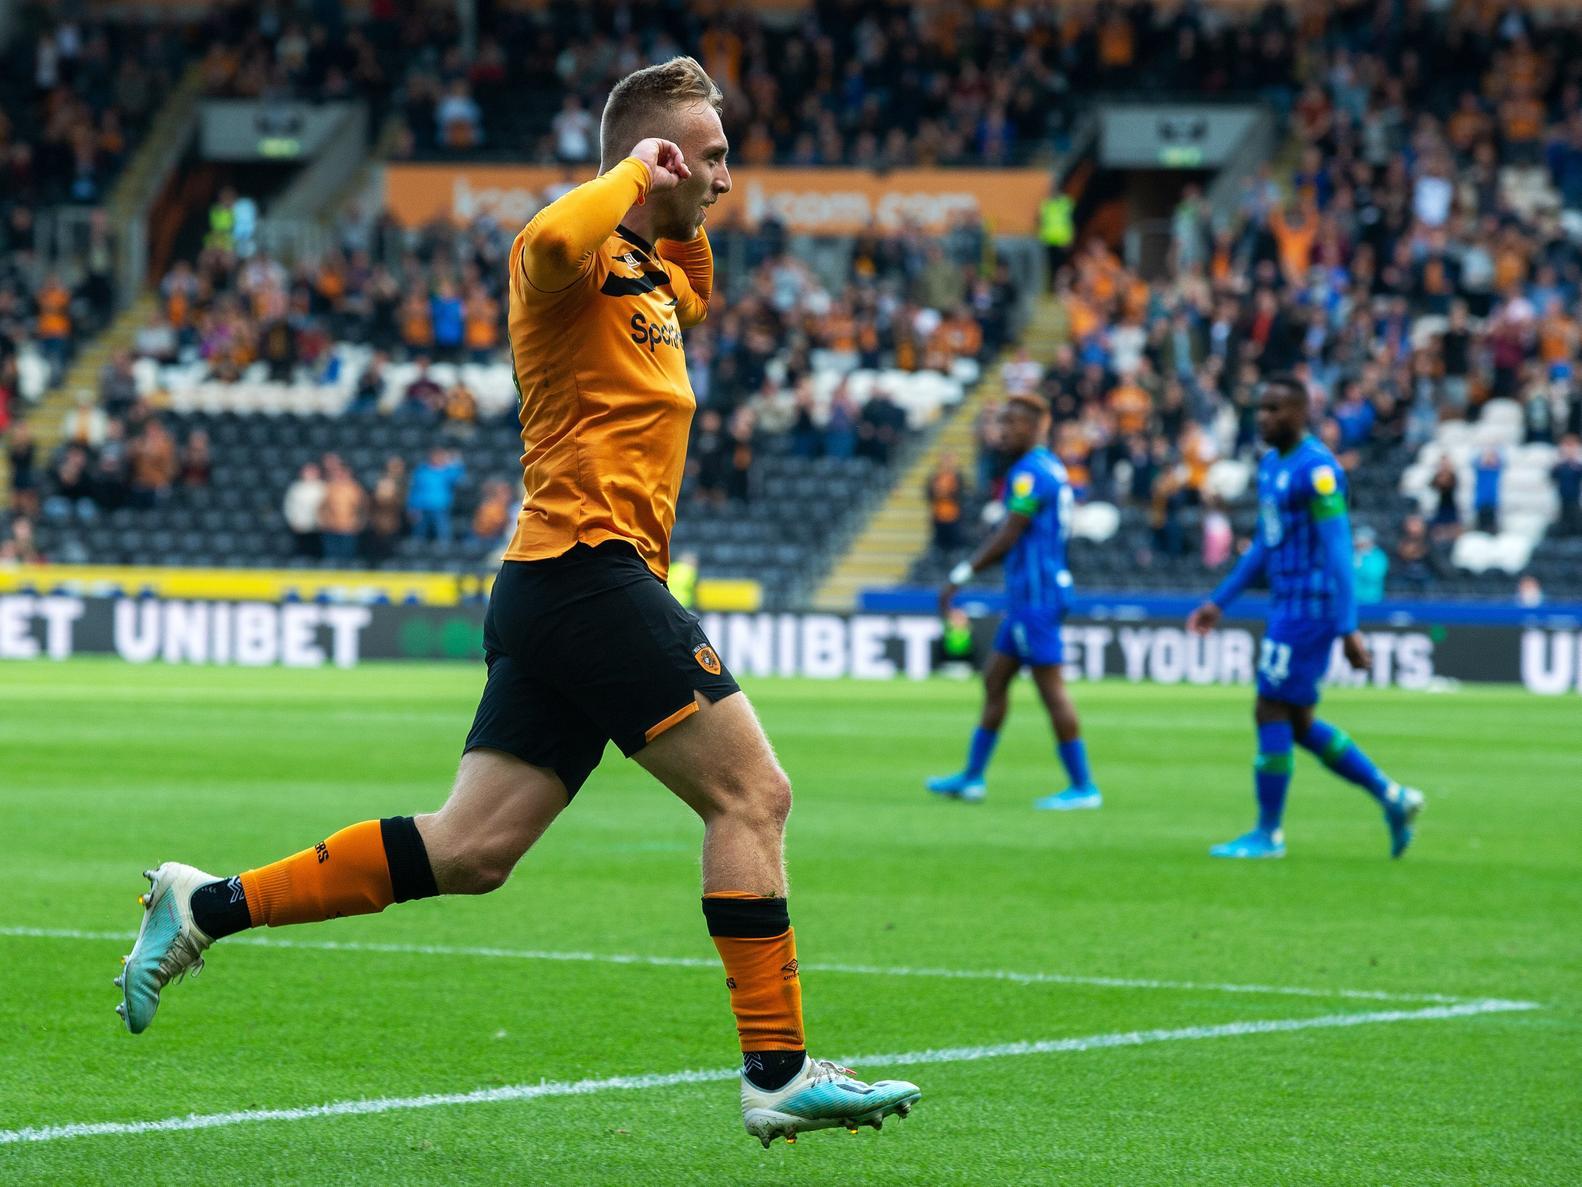 Transfer talk surrounding the Hull City forward wont go away with his contract set to expire in the summer. With reported interest from the likes of Newcastle United, Bowen says hell keep working until something changes.